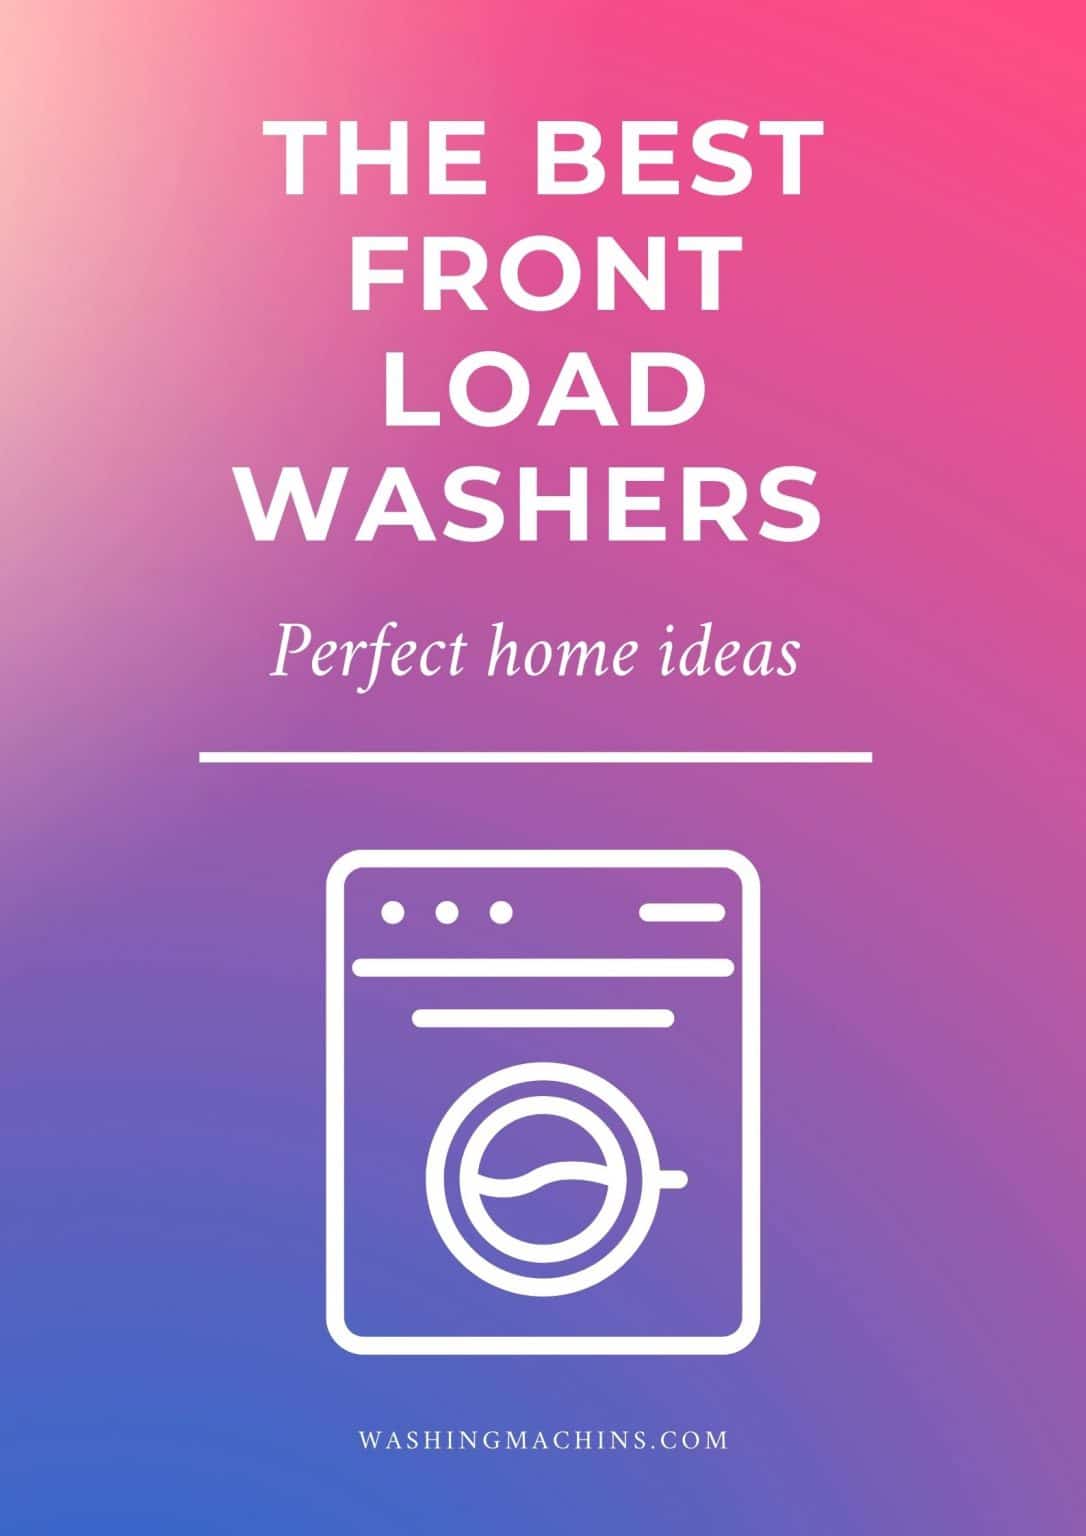 The 25 Best Front Load Washers of 2022